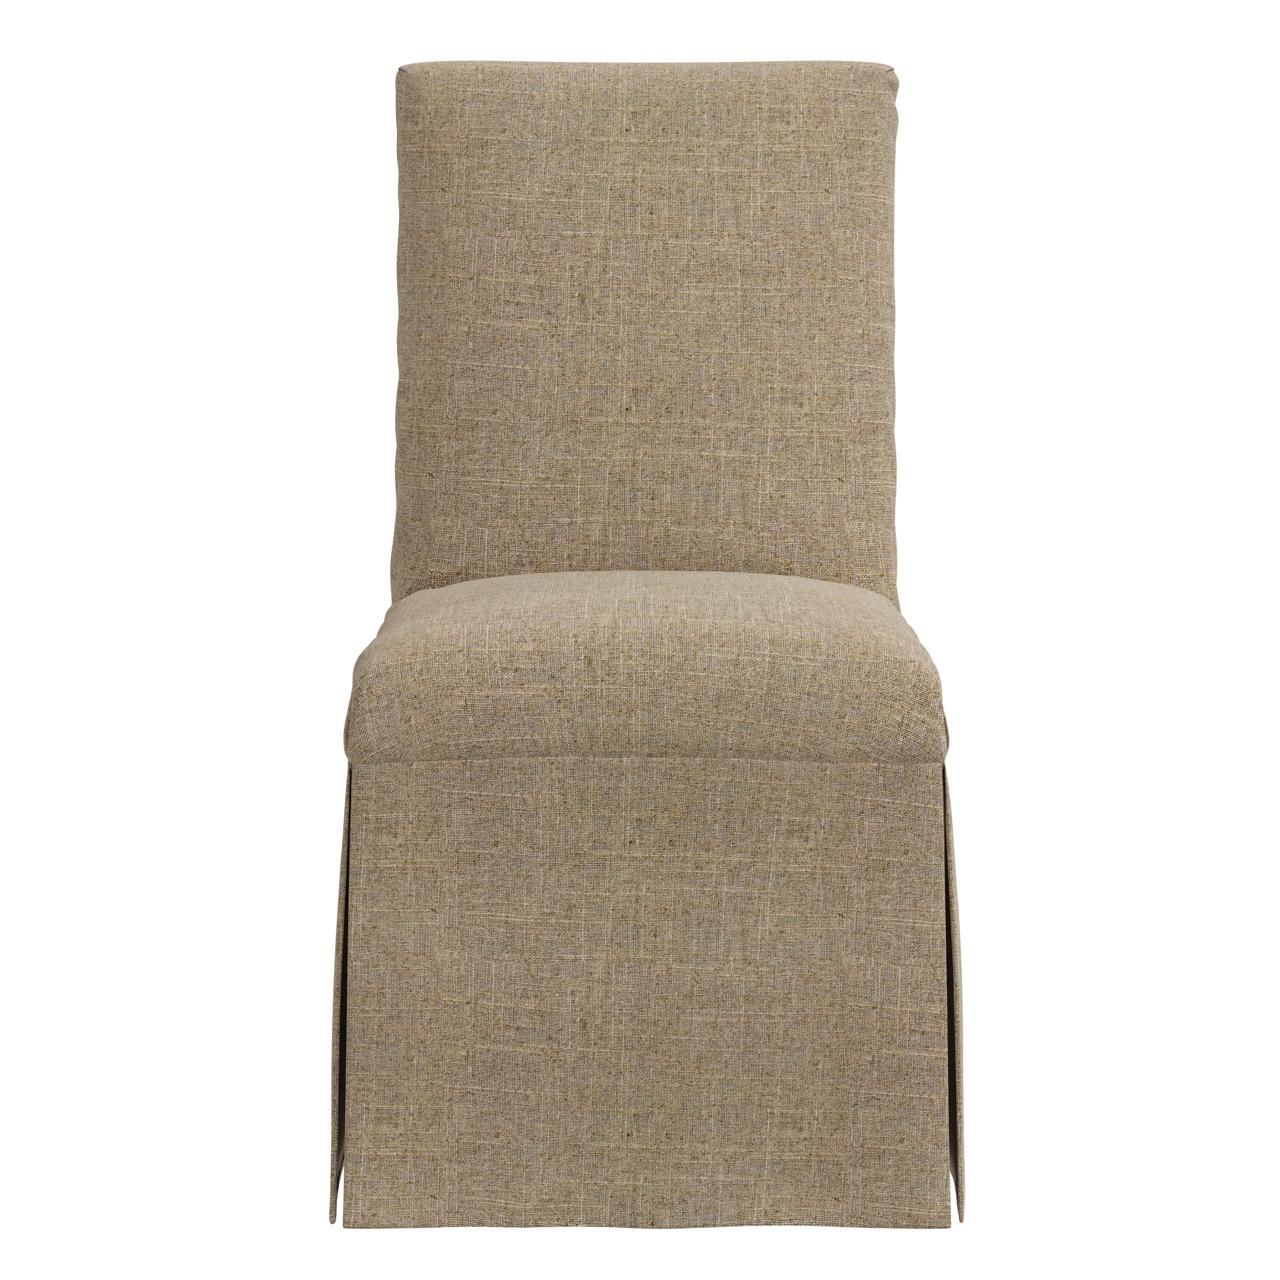 Alice Slipcover Dining Chair - Image 1